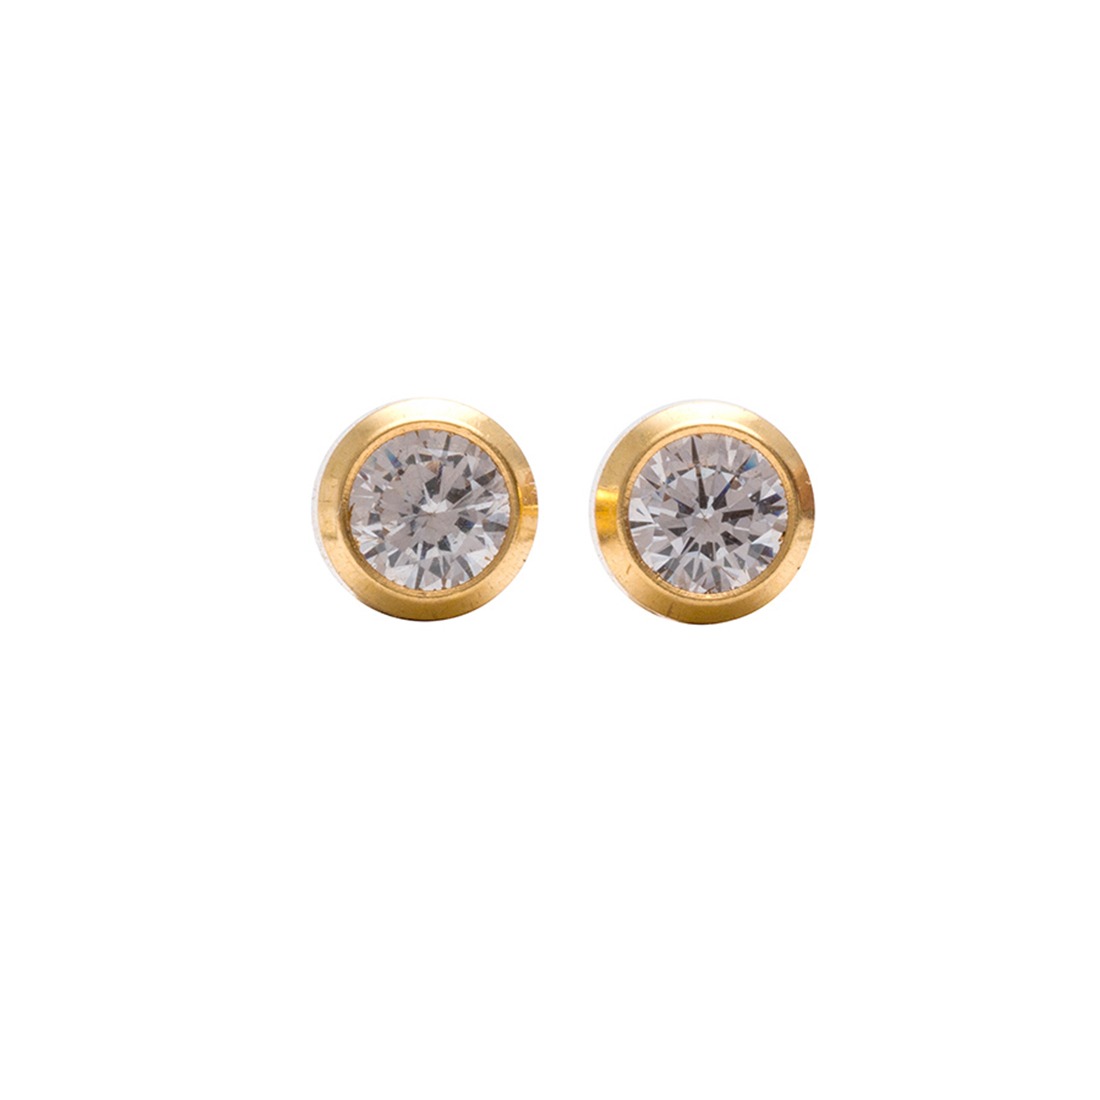 3MM - Bezel - Cubic Zirconia - Crystal Clear | Gold Plated Kids / Baby / Children’s Fashion Earrings | Studex Tiny Tips